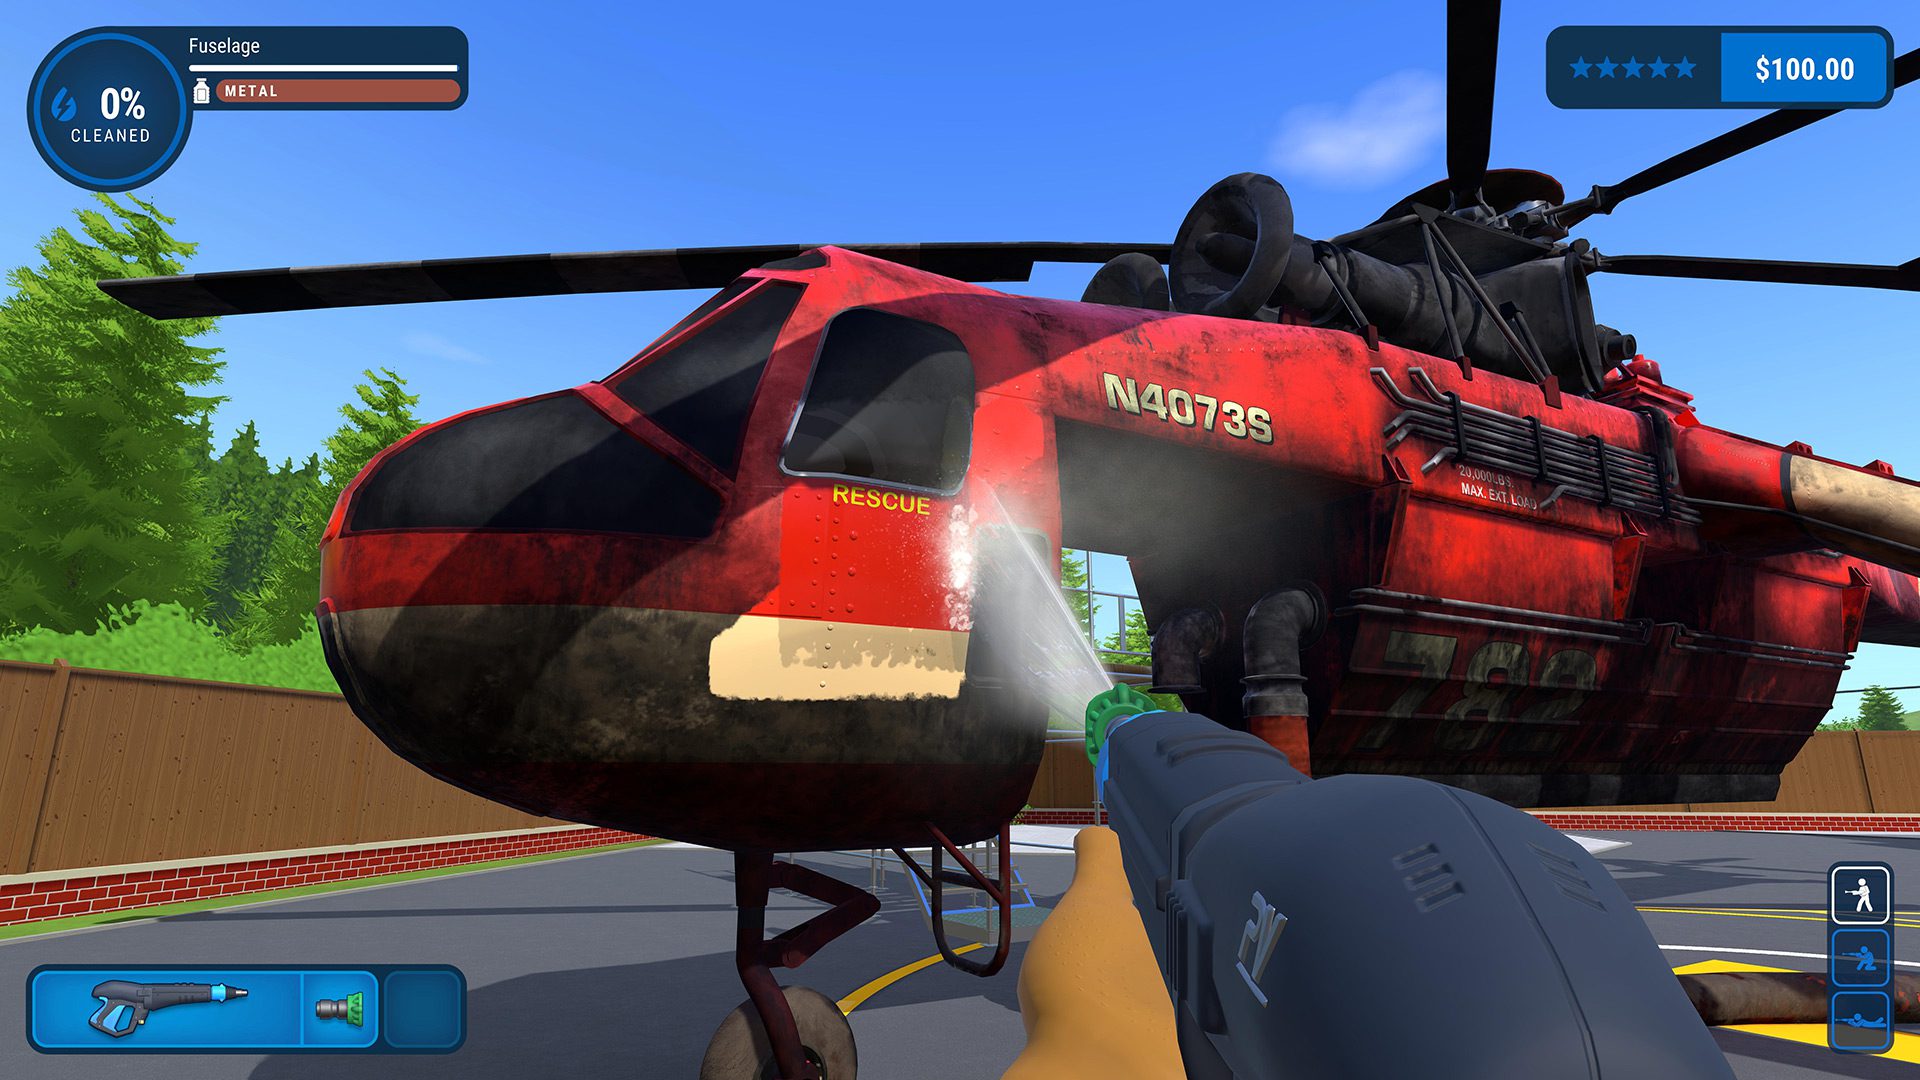 Cleaning a helicopter in PowerWash Simulator